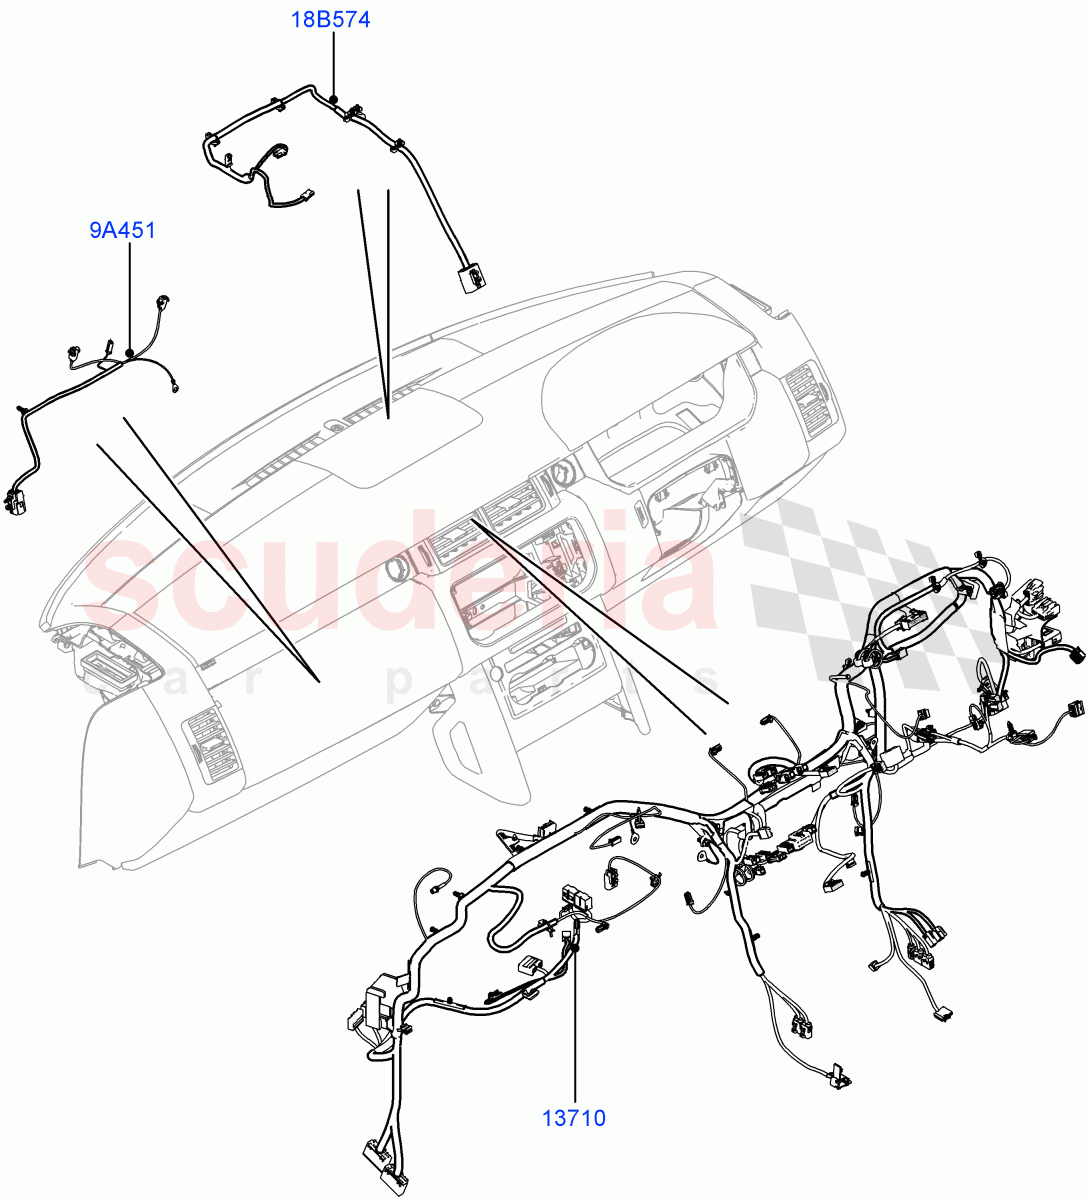 Electrical Wiring - Engine And Dash(Facia)(3.0 V6 Diesel Electric Hybrid Eng)((V)FROMFA000001,(V)TOFA999999) of Land Rover Land Rover Range Rover (2012-2021) [3.0 I6 Turbo Diesel AJ20D6]